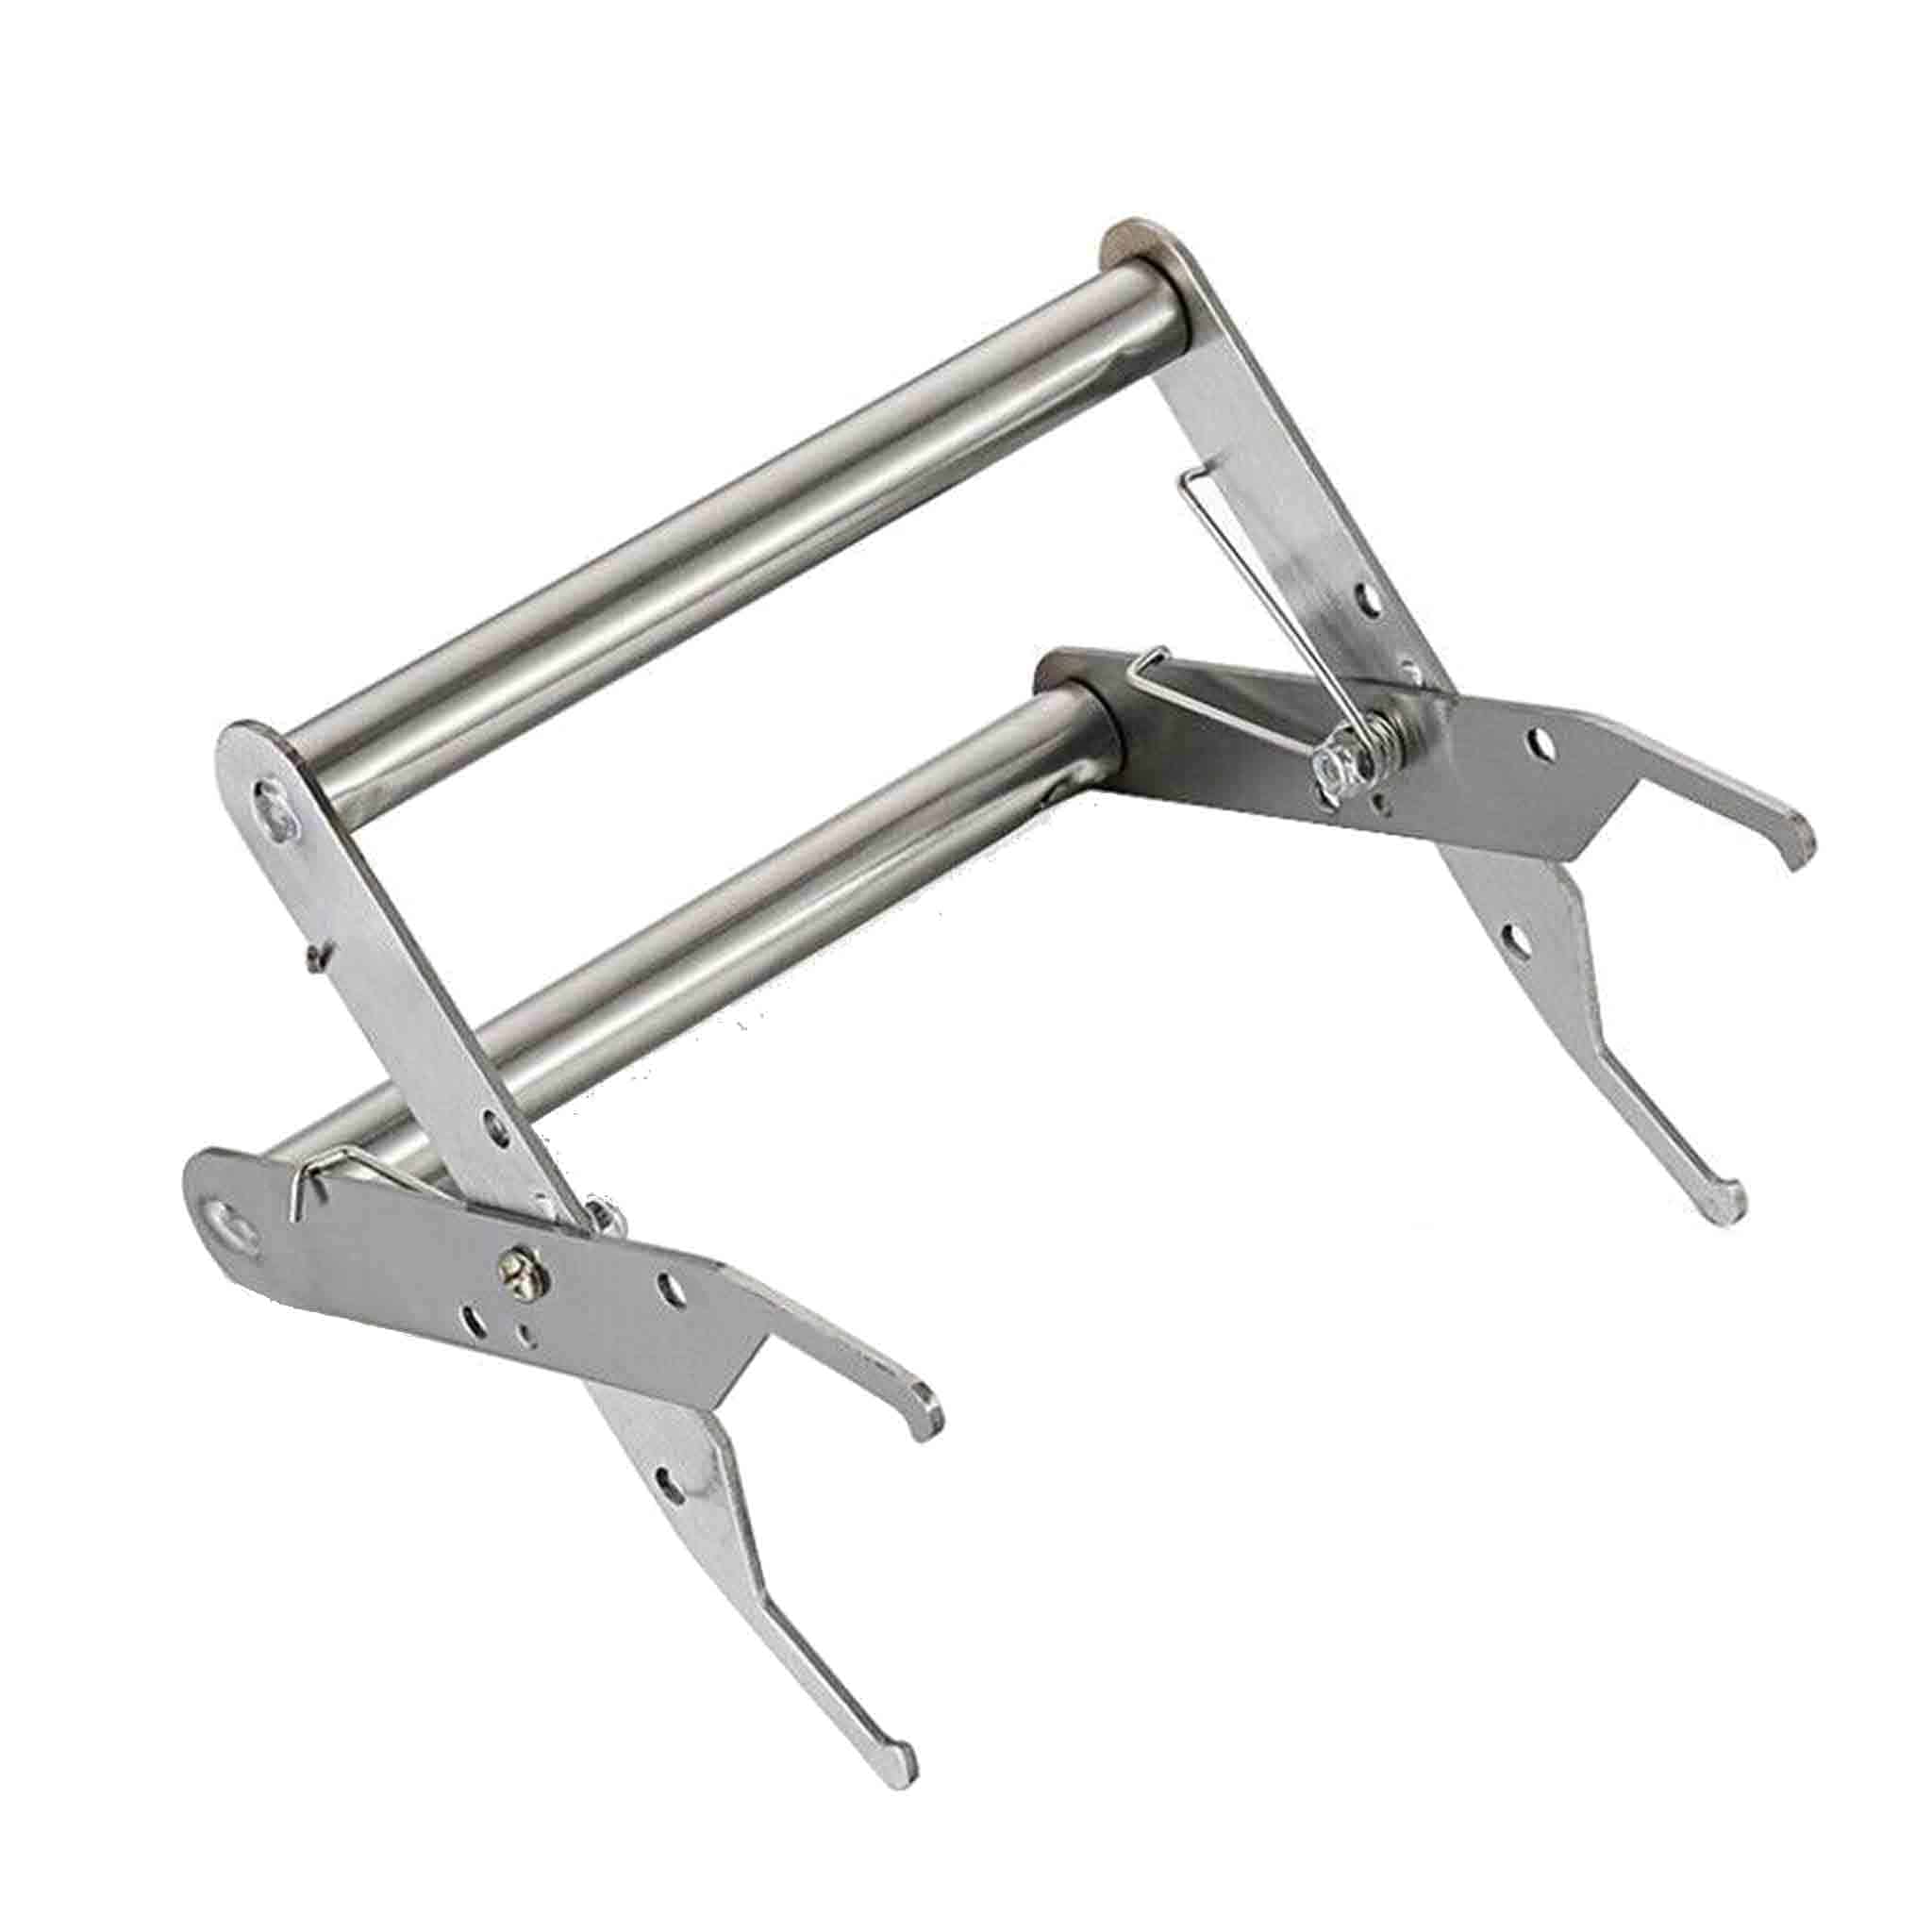 Frame Grip made of Stainless steel with Spring Action Opener - Tools collection by Buzzbee Beekeeping Supplies